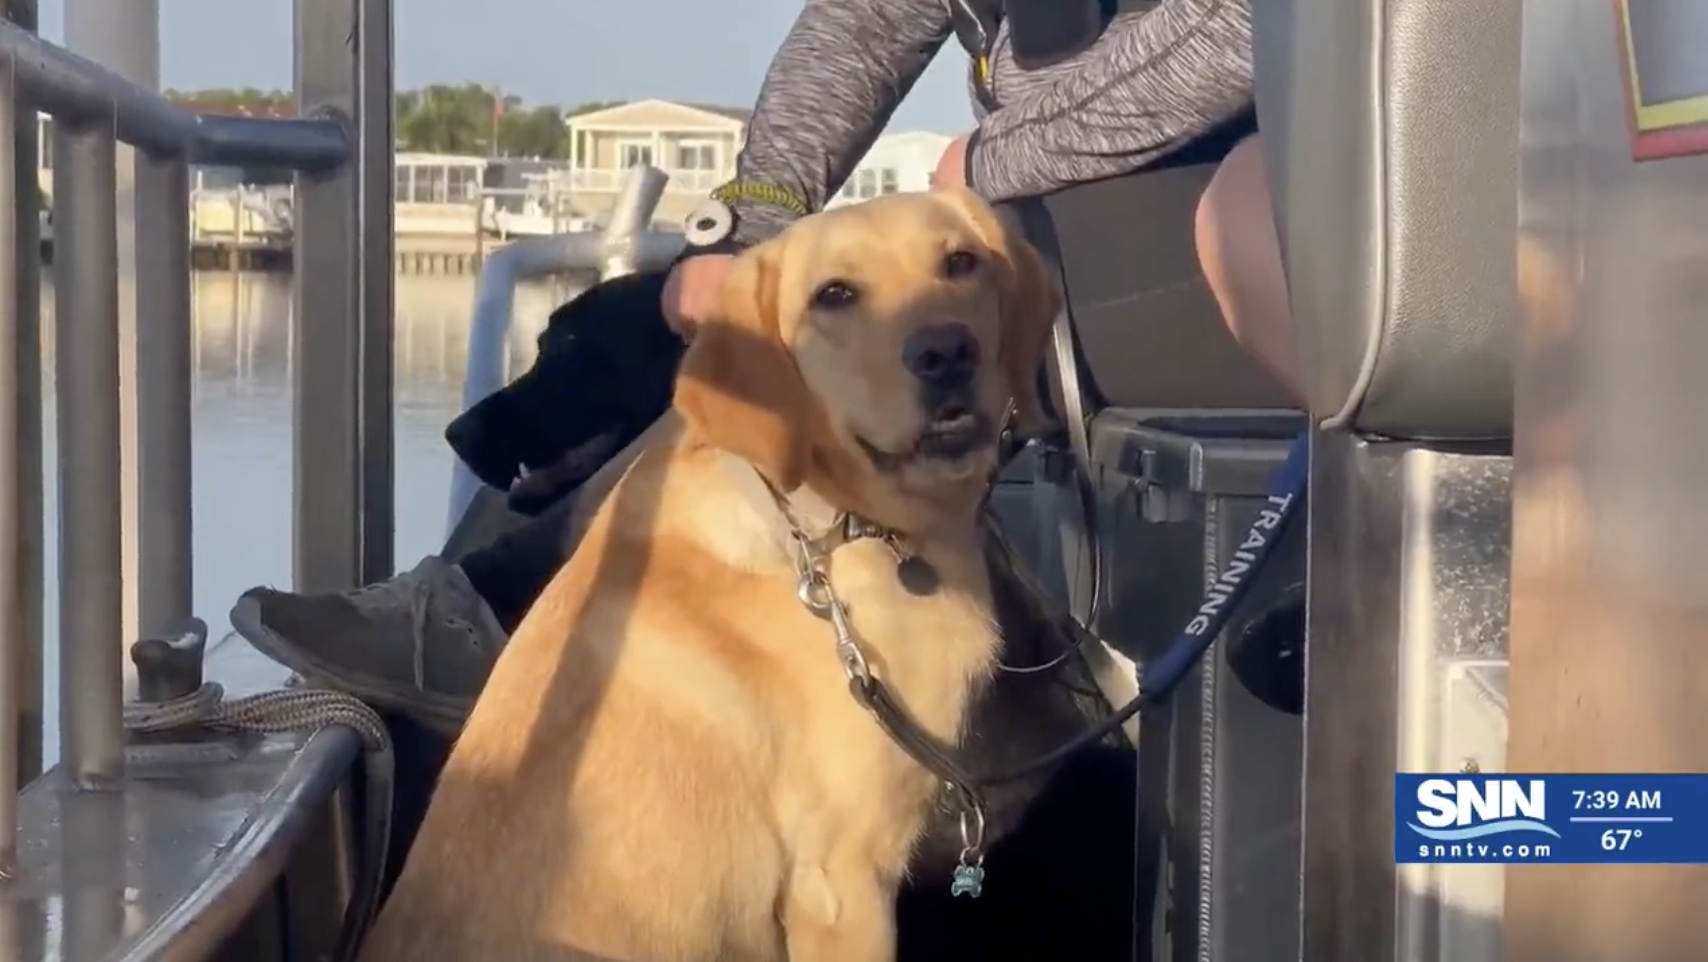 A yellow Labrador in training sits on a boat and looks sideways at the camera.